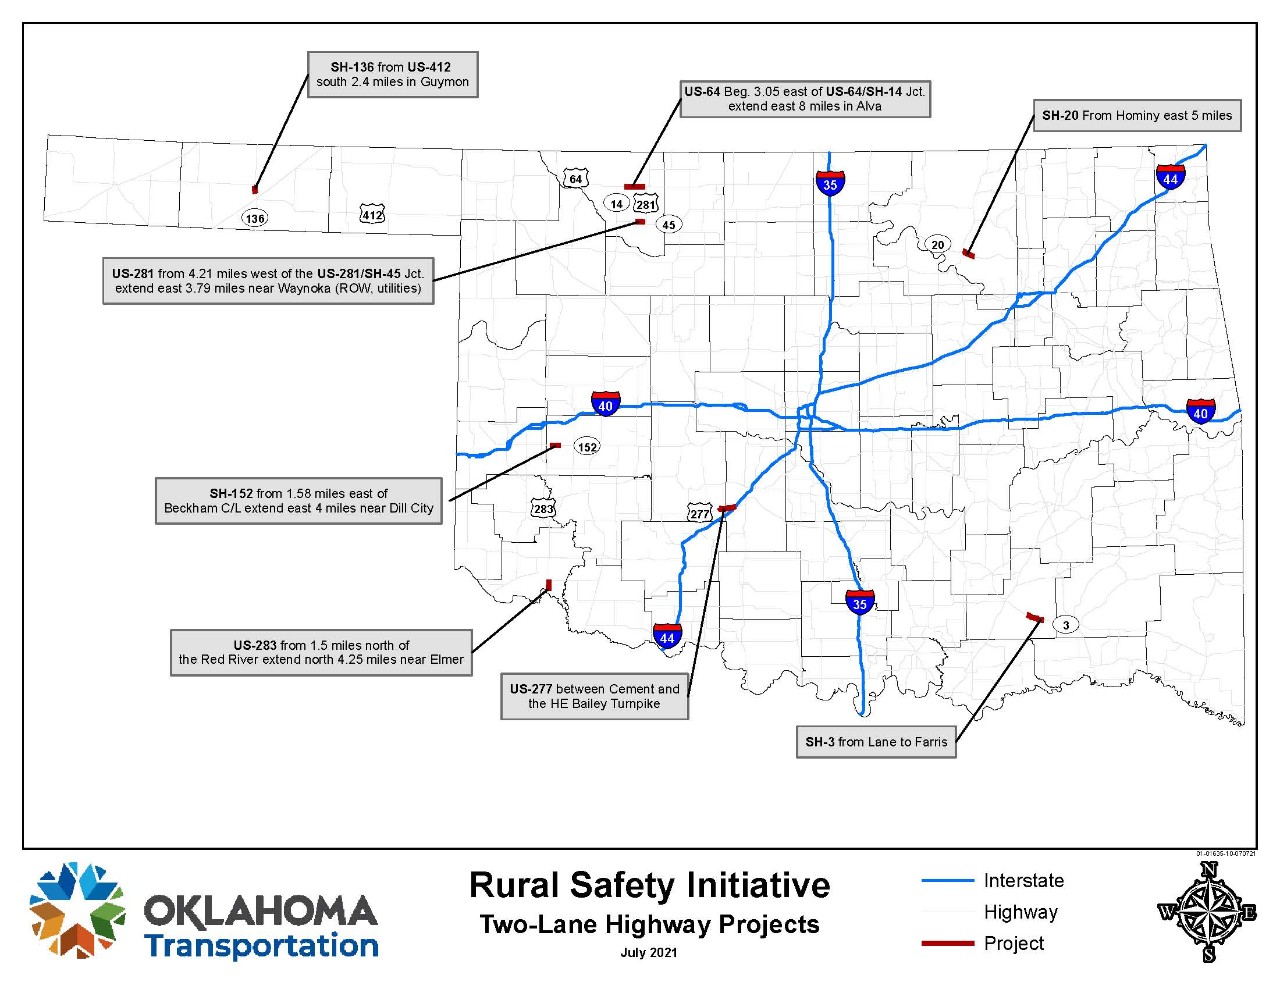 Rural Safety Initiative - Two-Lane Highway Projects